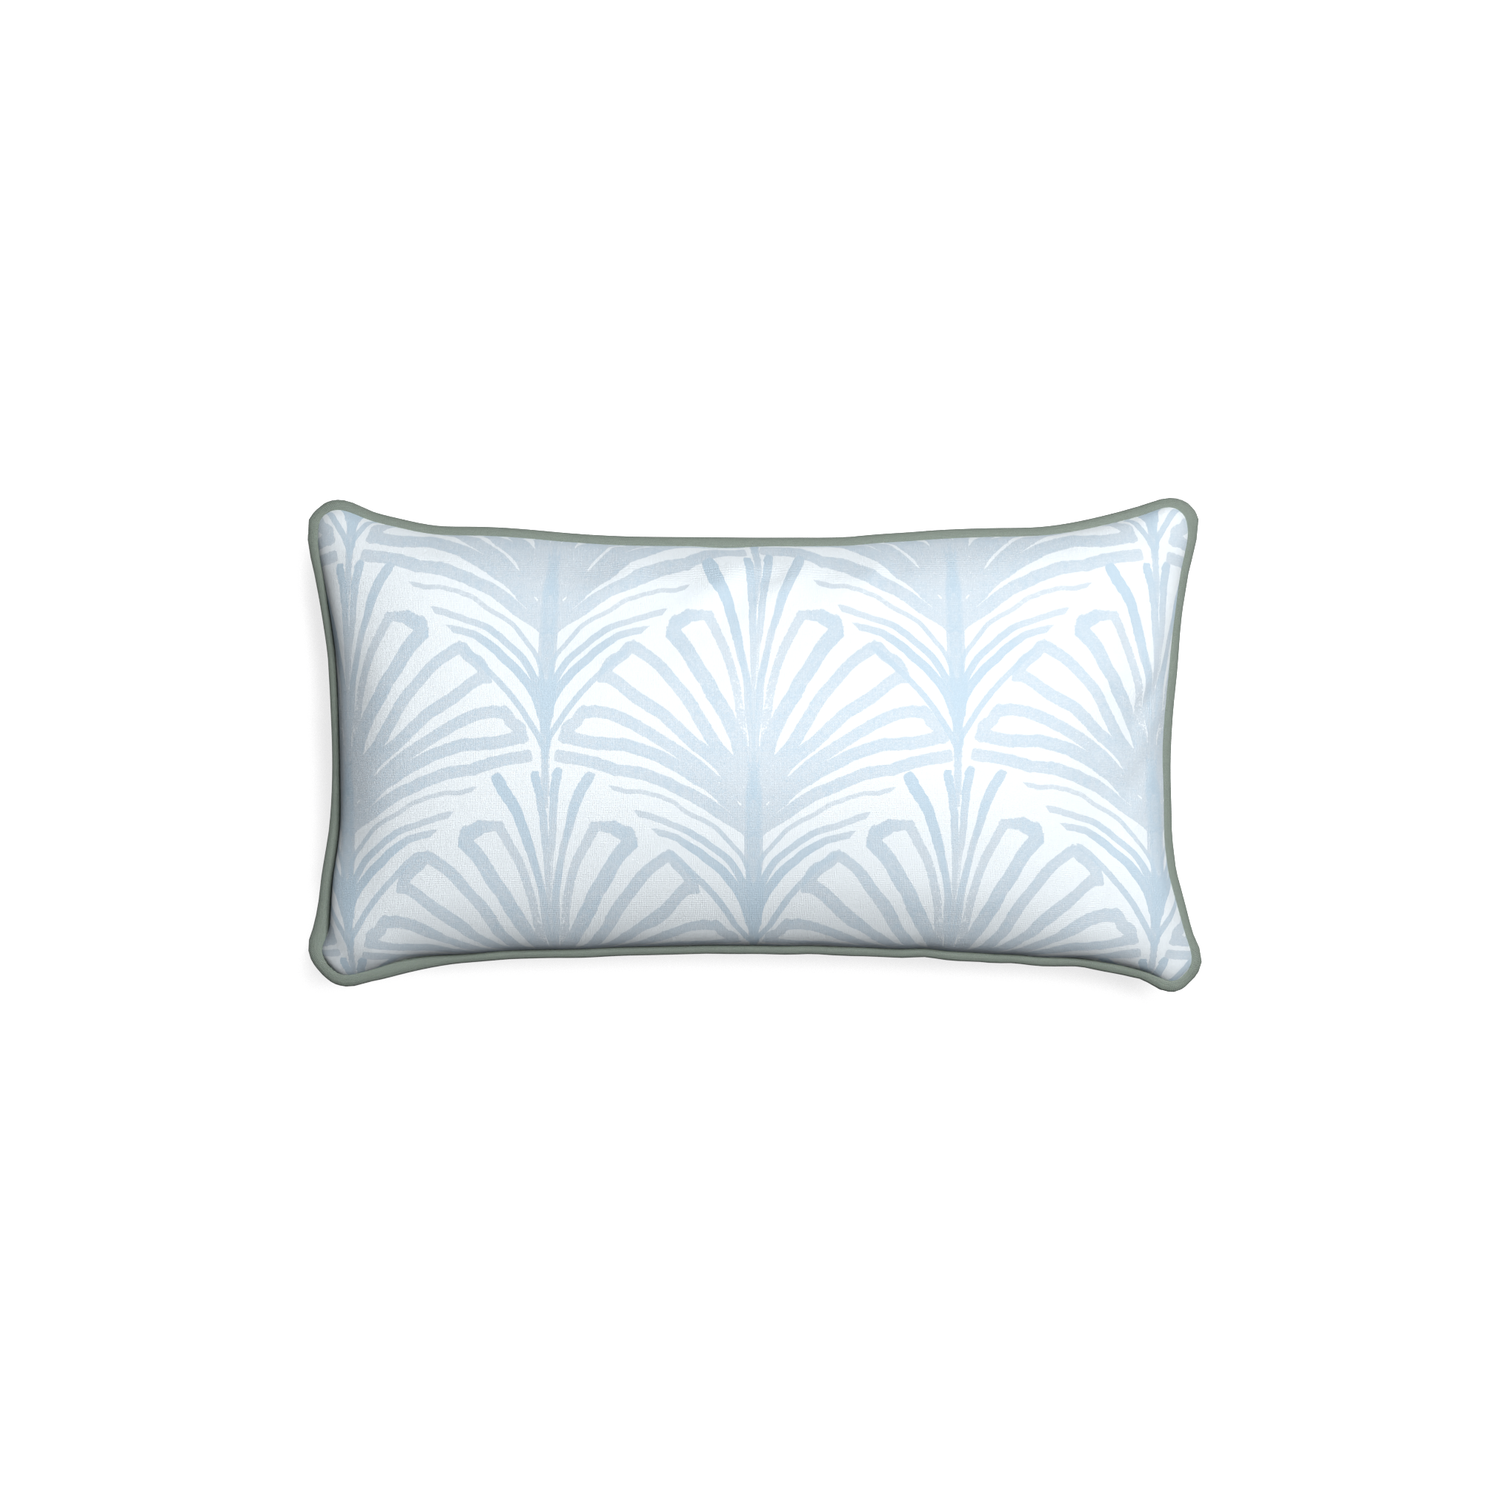 Petite-lumbar suzy sky custom sky blue palmpillow with sage piping on white background